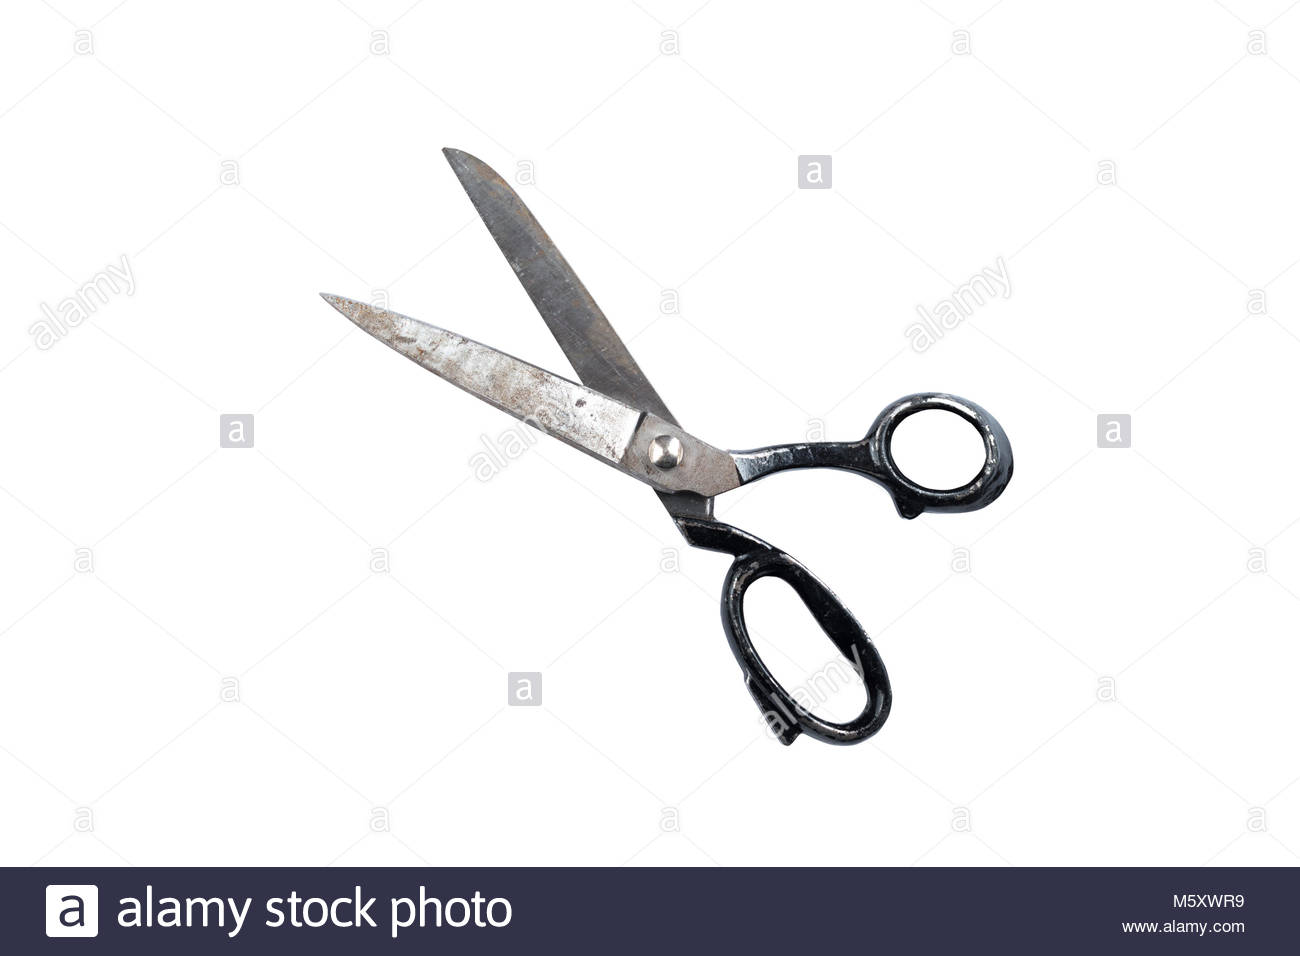 Old Metal Industrial Scissors Isolated On White Background Saved